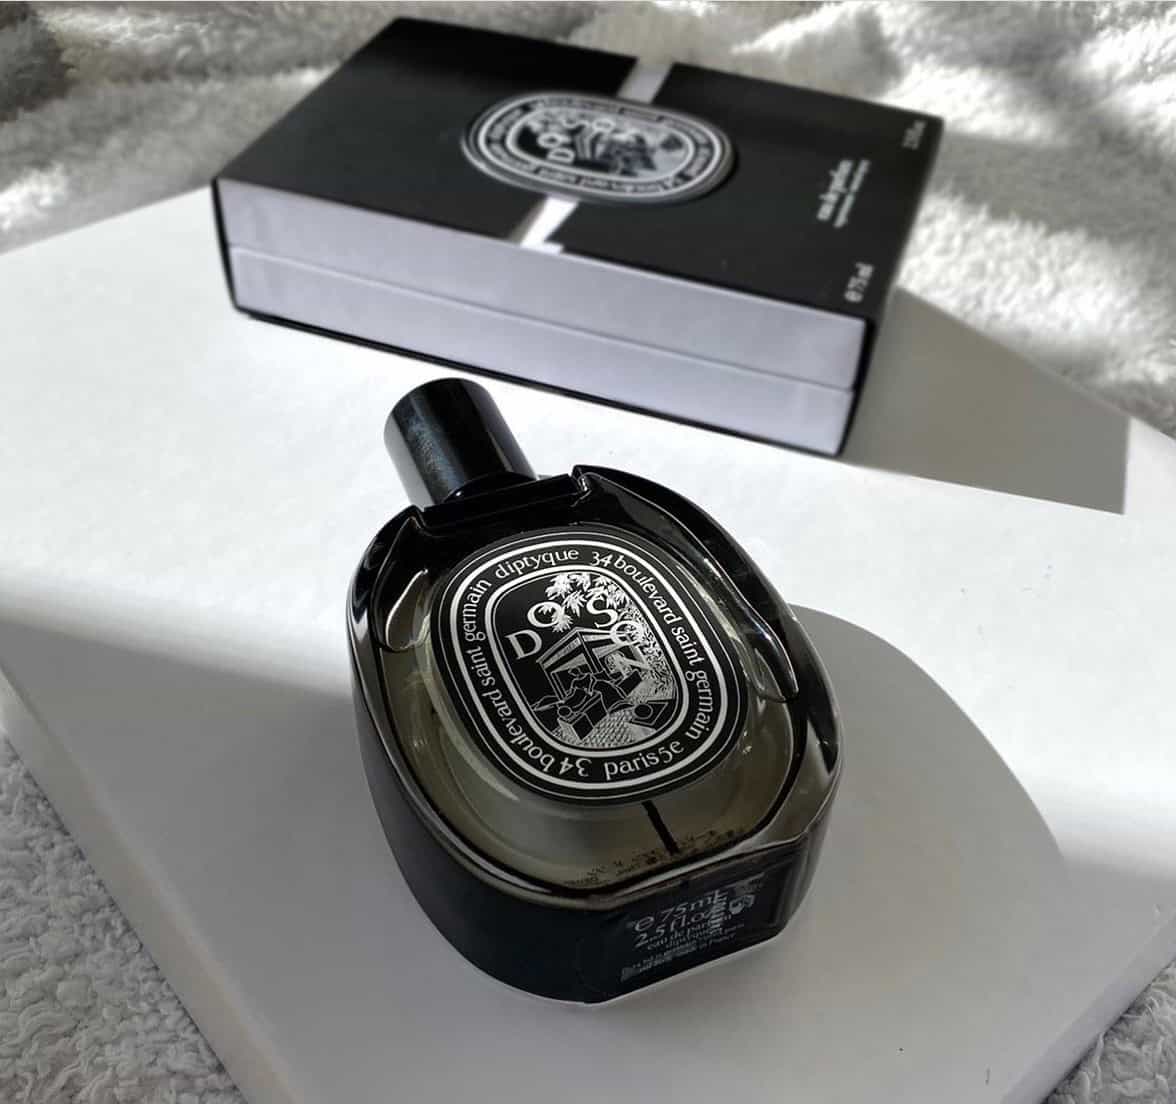 Bottle of cologne and box laid on a plate